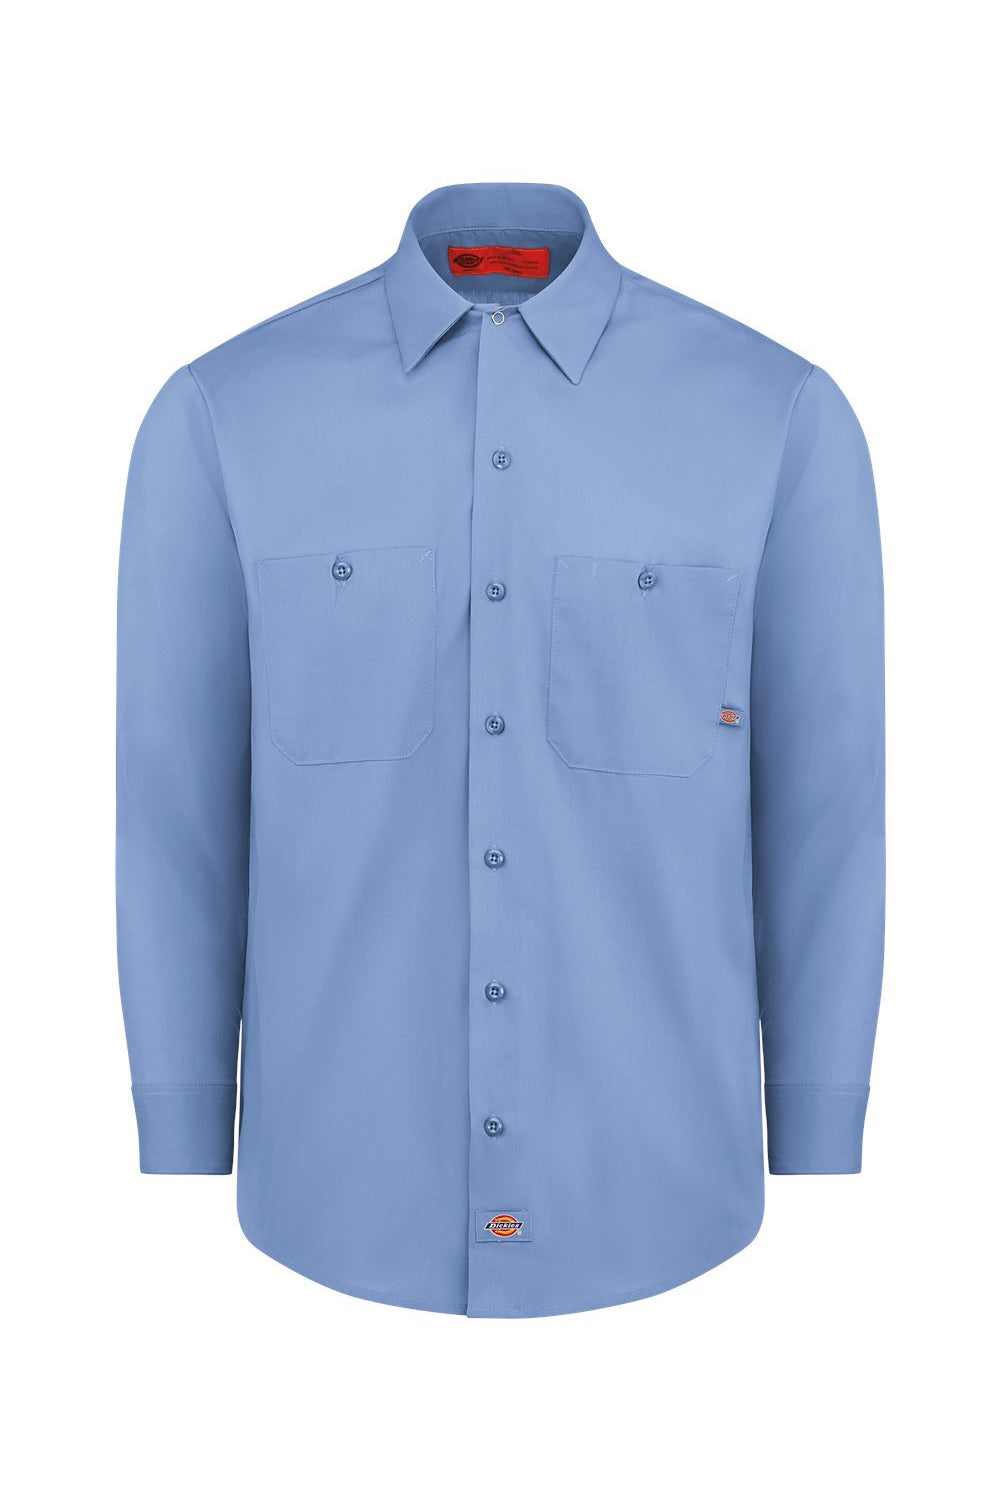 Dickies L535 Mens Industrial Wrinkle Resistant Long Sleeve Button Down Work Shirt w/ Double Pockets Light Blue Flat Front